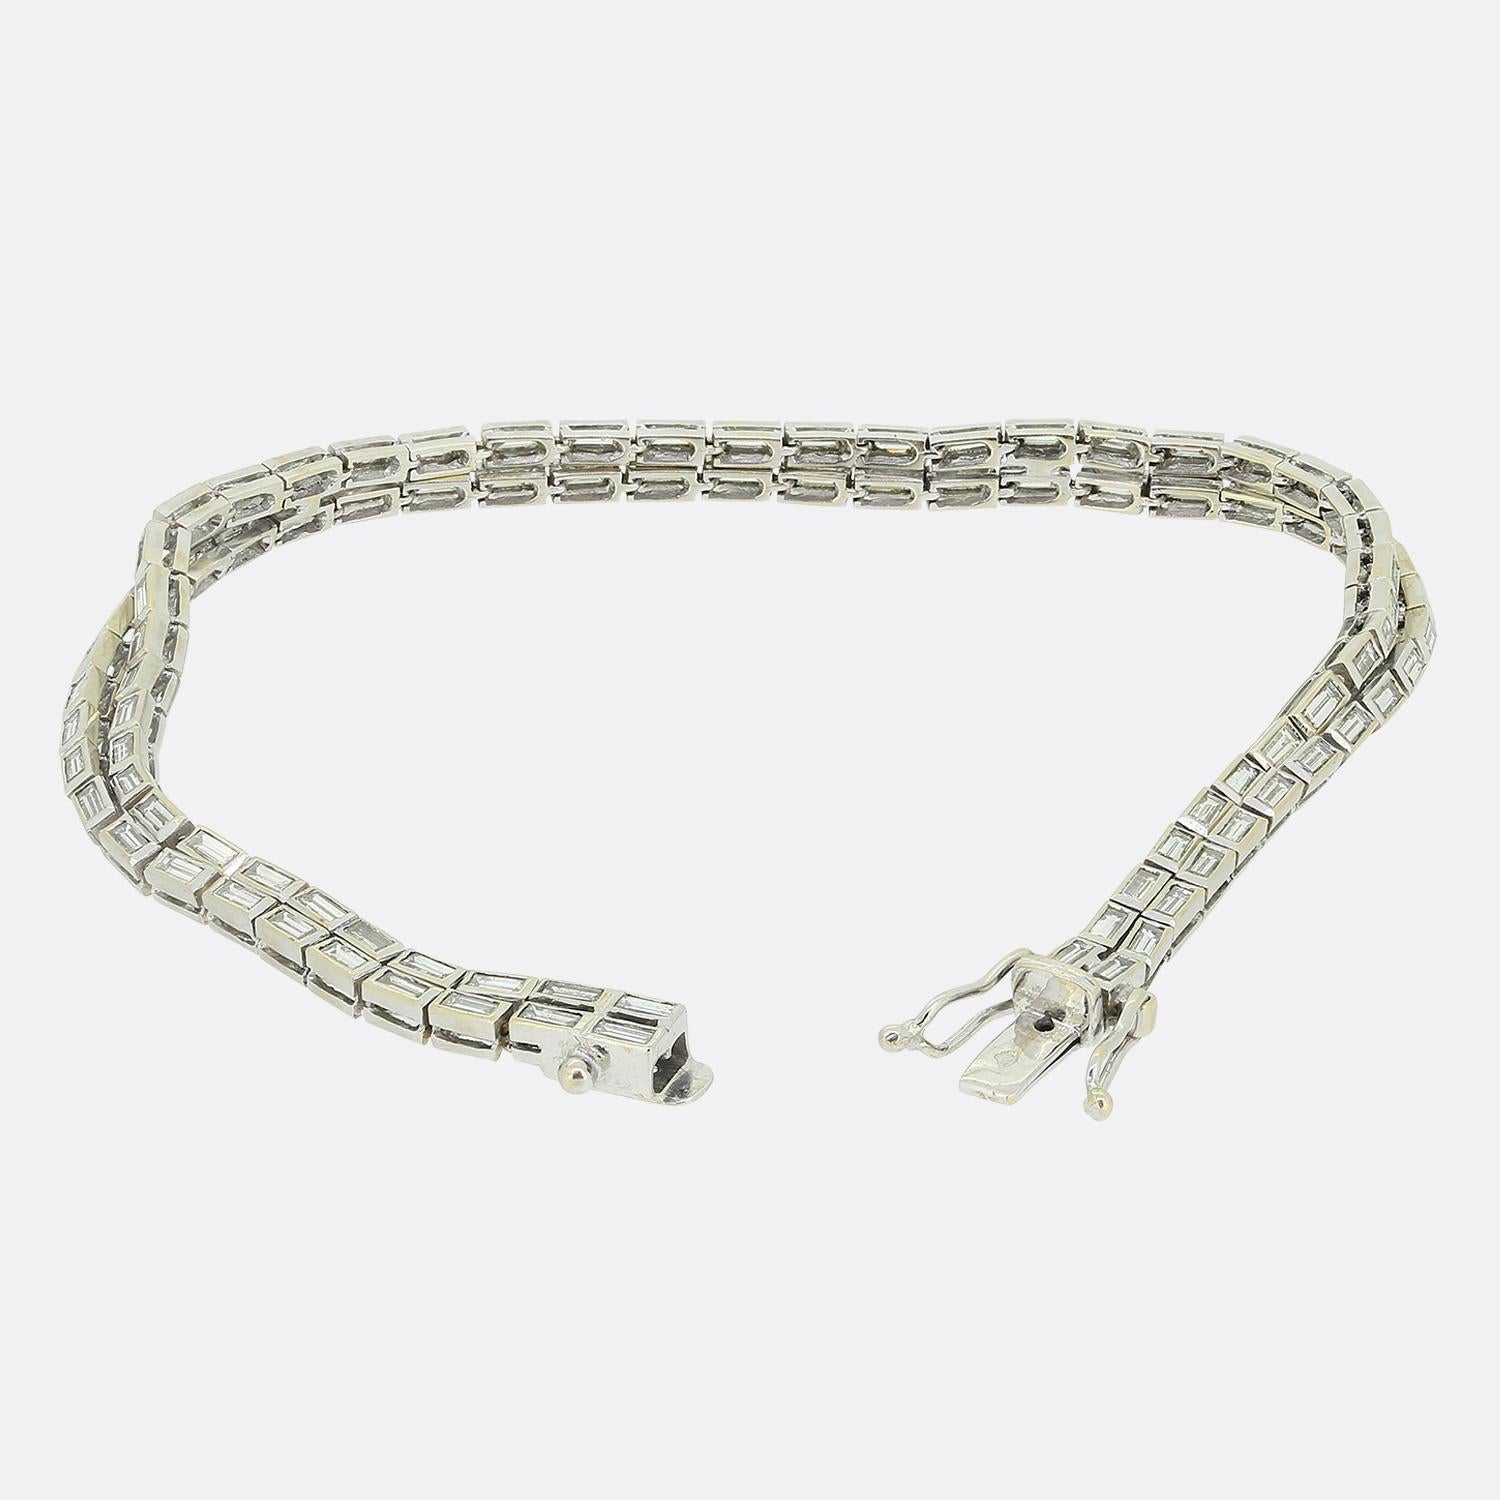 Here we have a stunning piece crafted in France at a time when the Art Deco style was continuing to revolutionise the world of design. This 18ct white gold bracelet showcases two rows of straight baguette cut diamonds atop of one another in a single